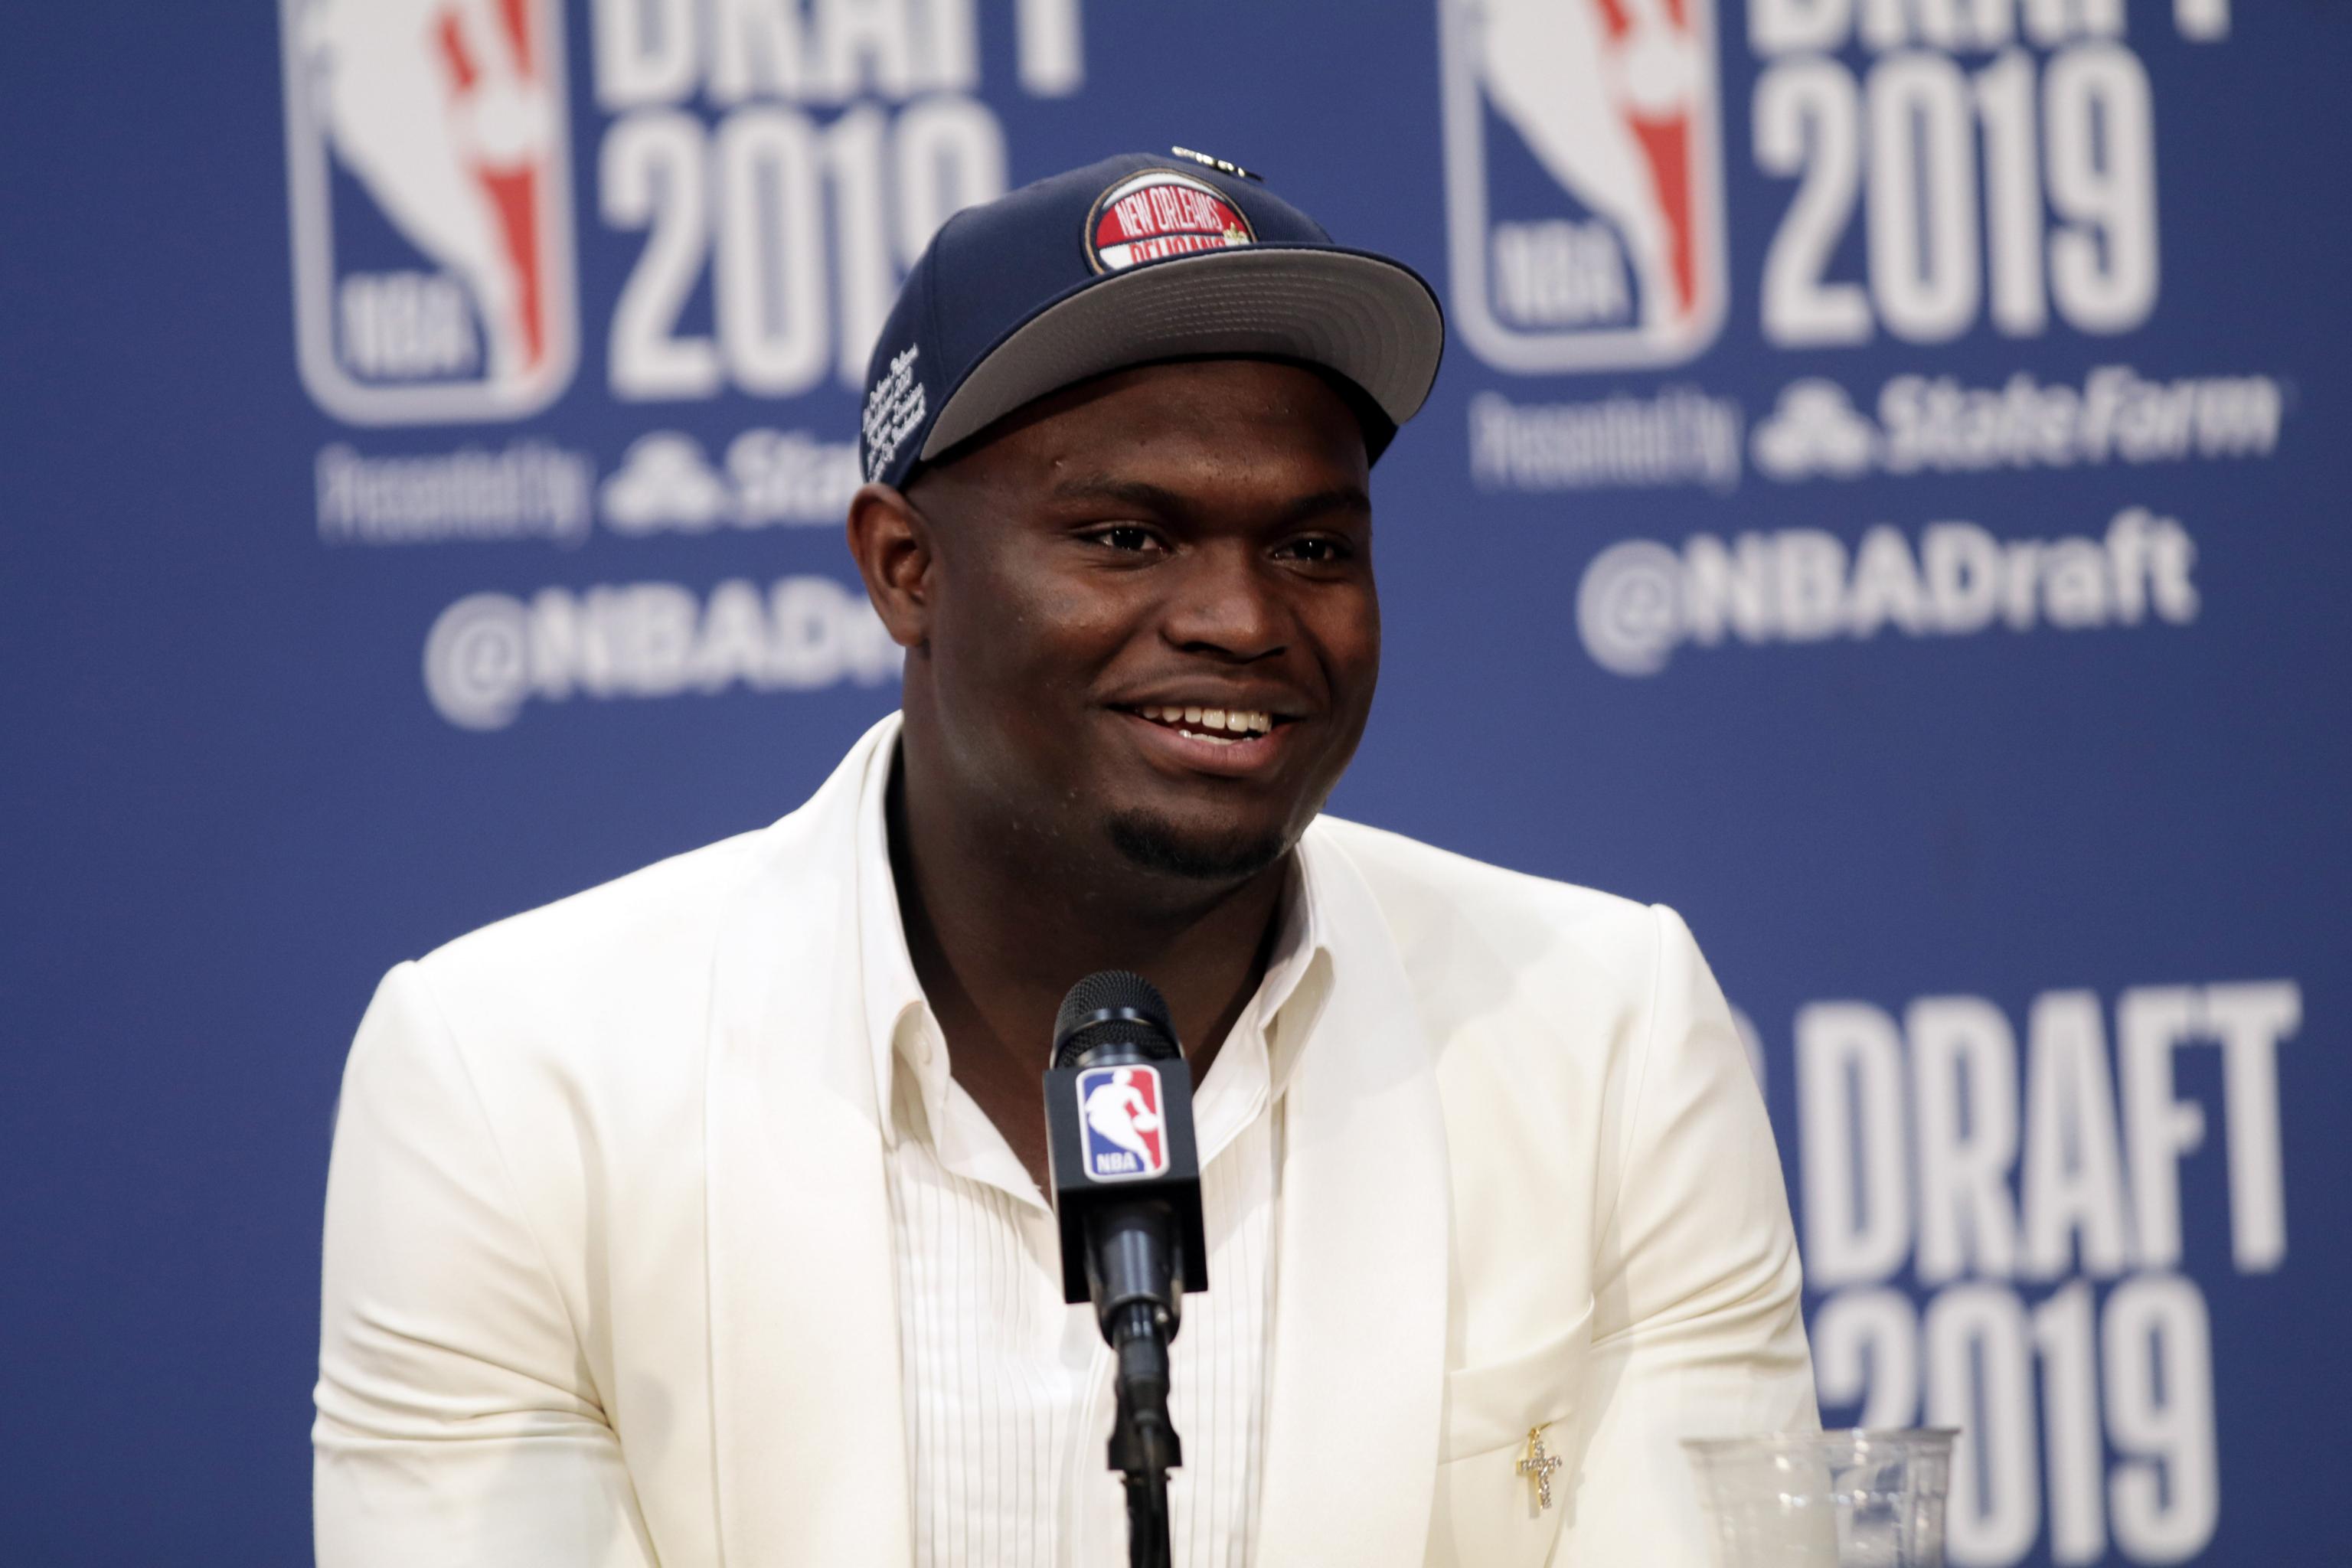 NBA Draft watch: Deandre Ayton, Collin Sexton both live up to hype